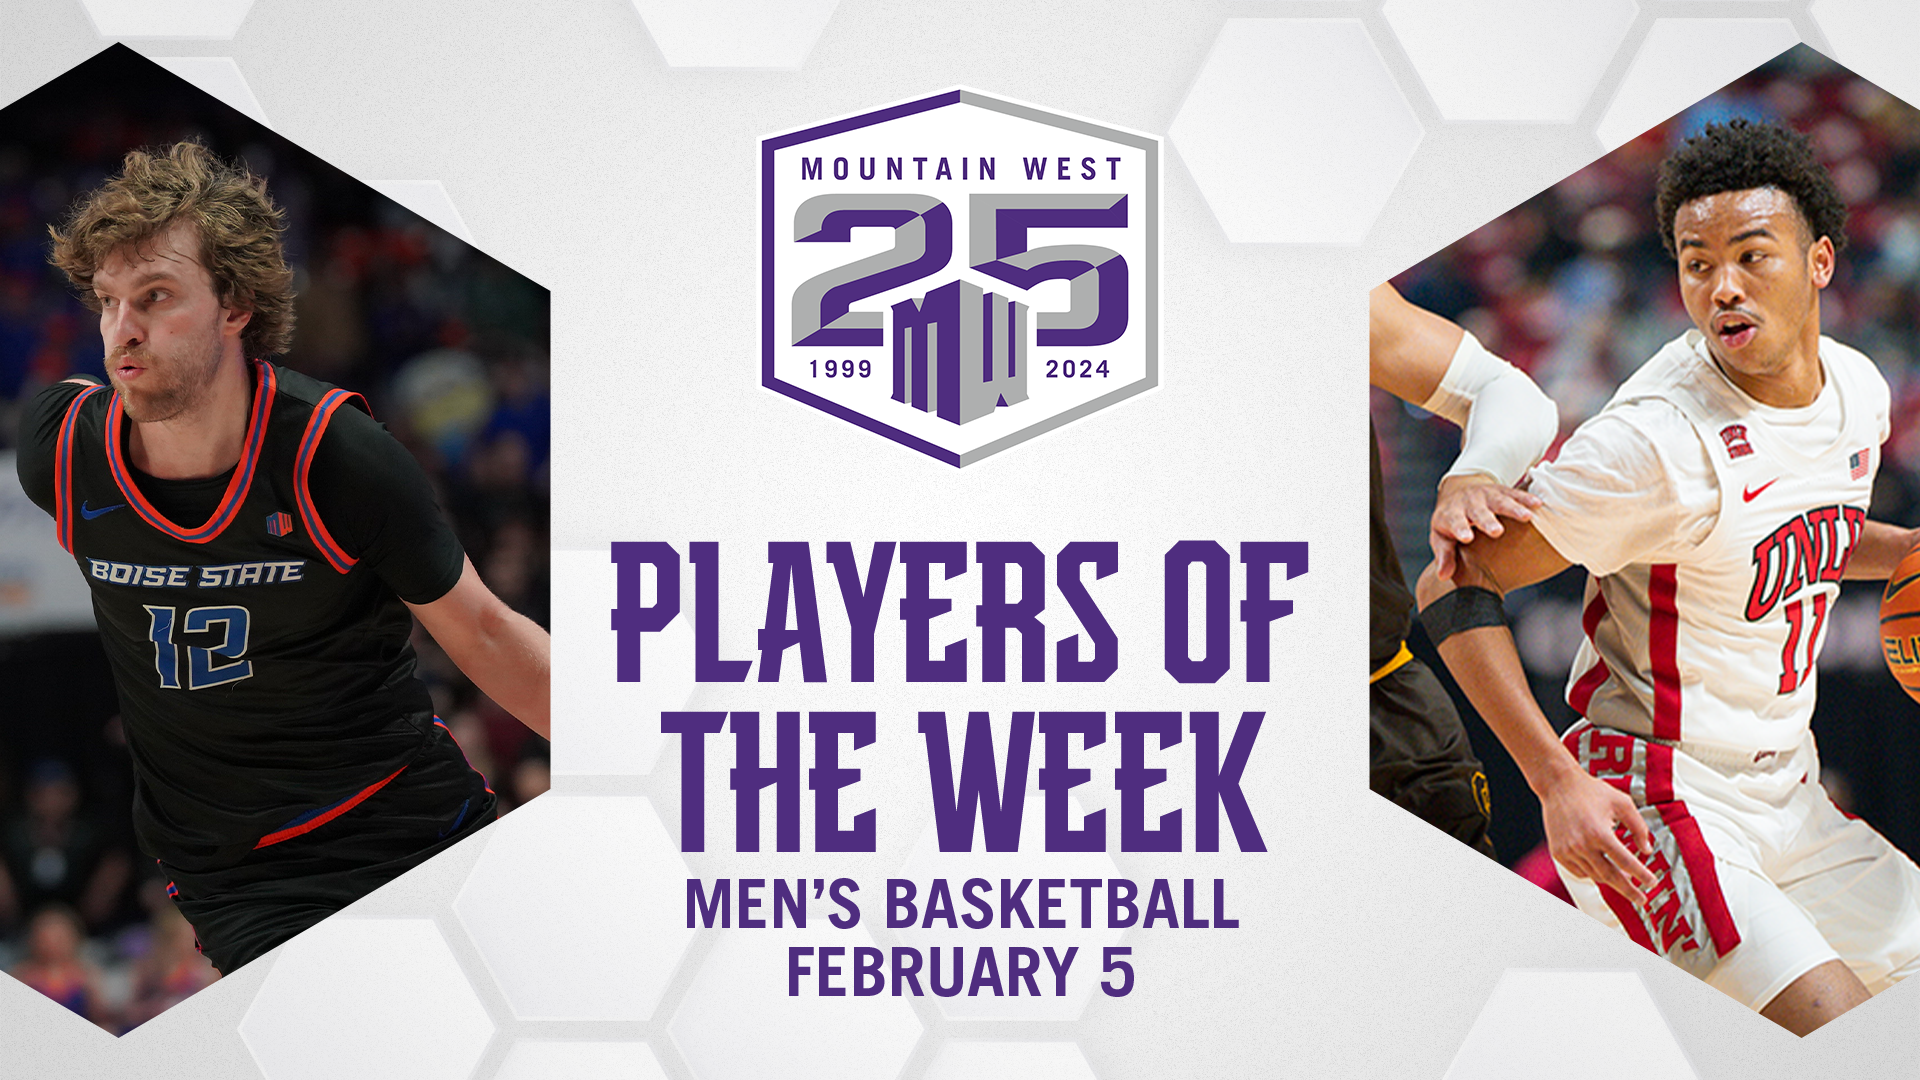 Mountain West Men's Basketball Players of the Week - Feb. 5